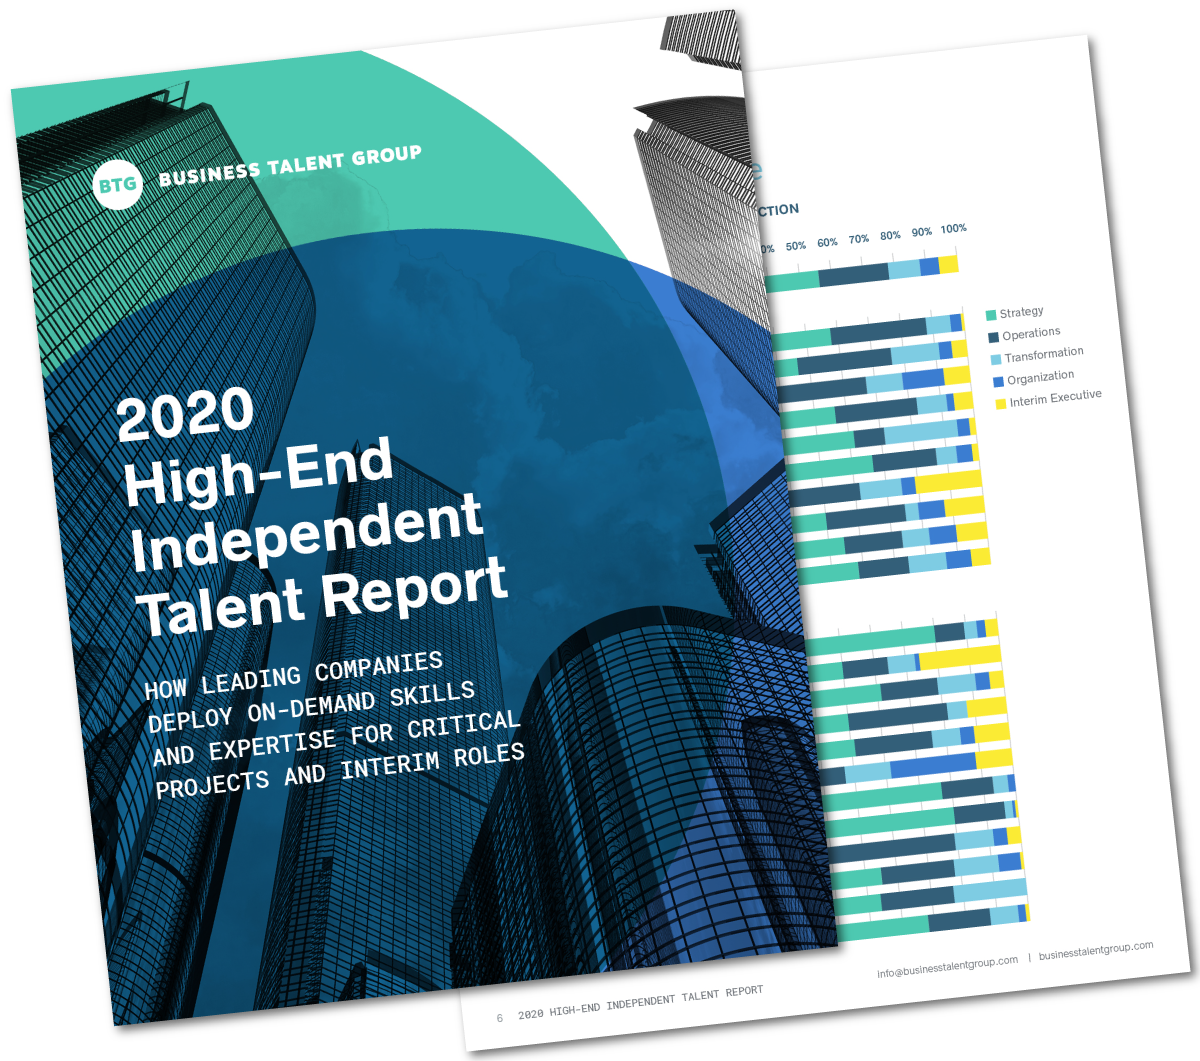 2020 High-End Independent Talent Report cover and teaser image